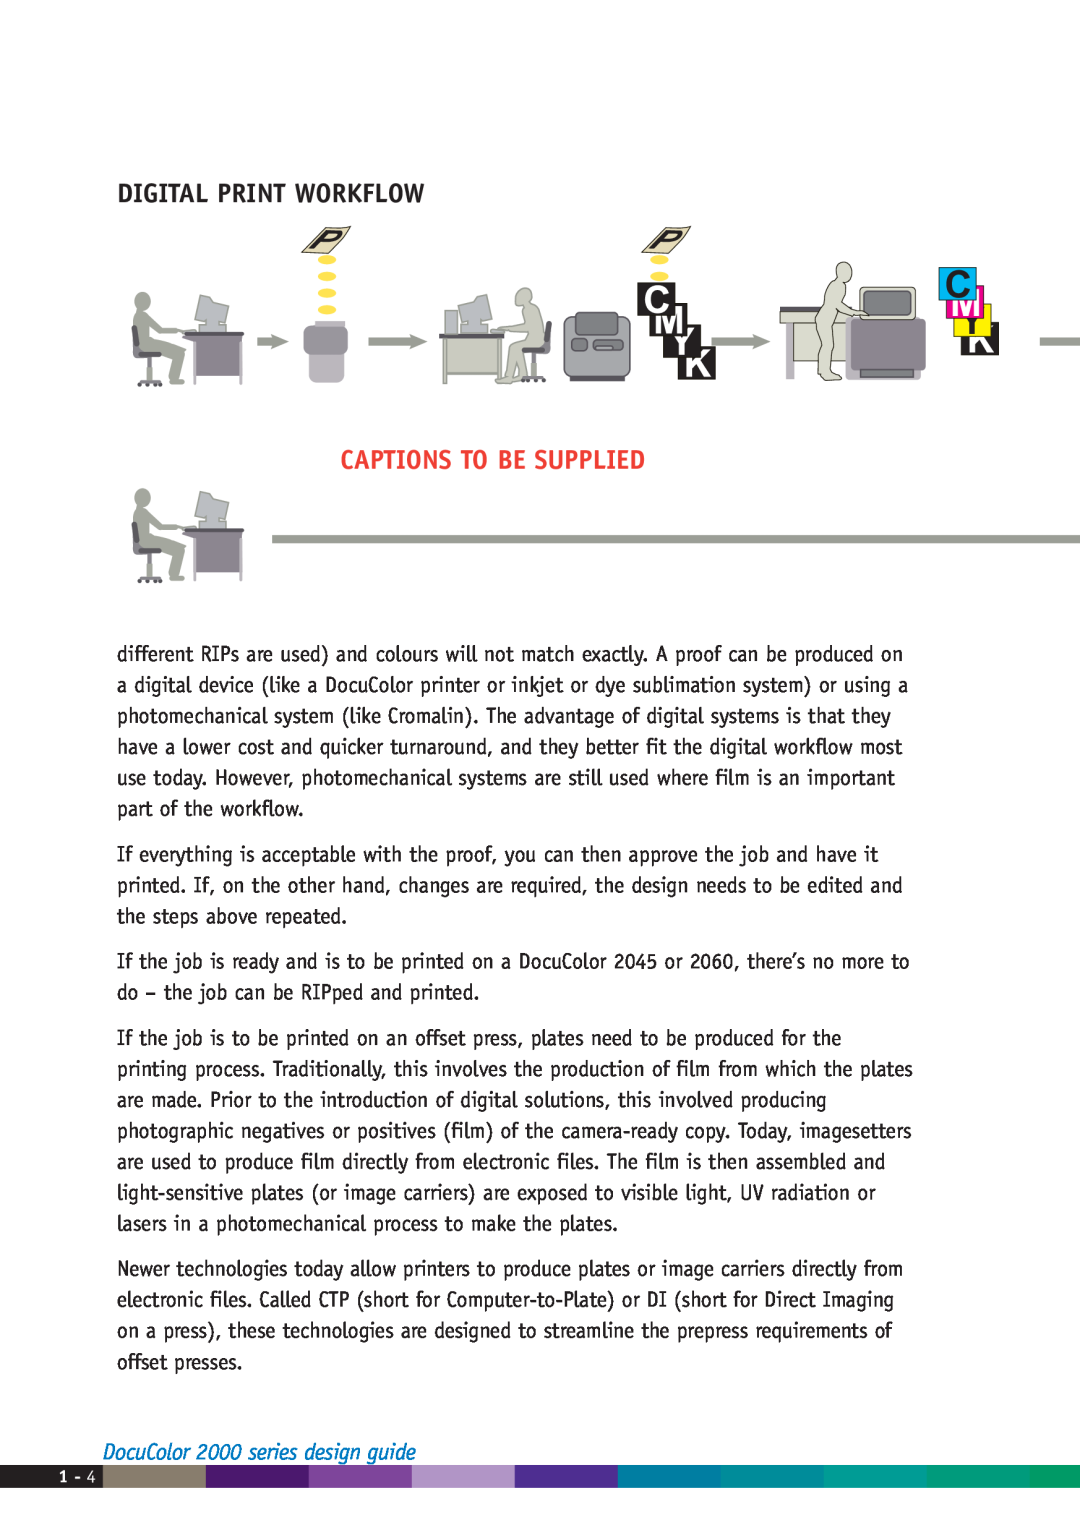 Xerox manual Digital Print Workflow, Captions To Be Supplied, DocuColor 2000 series design guide 